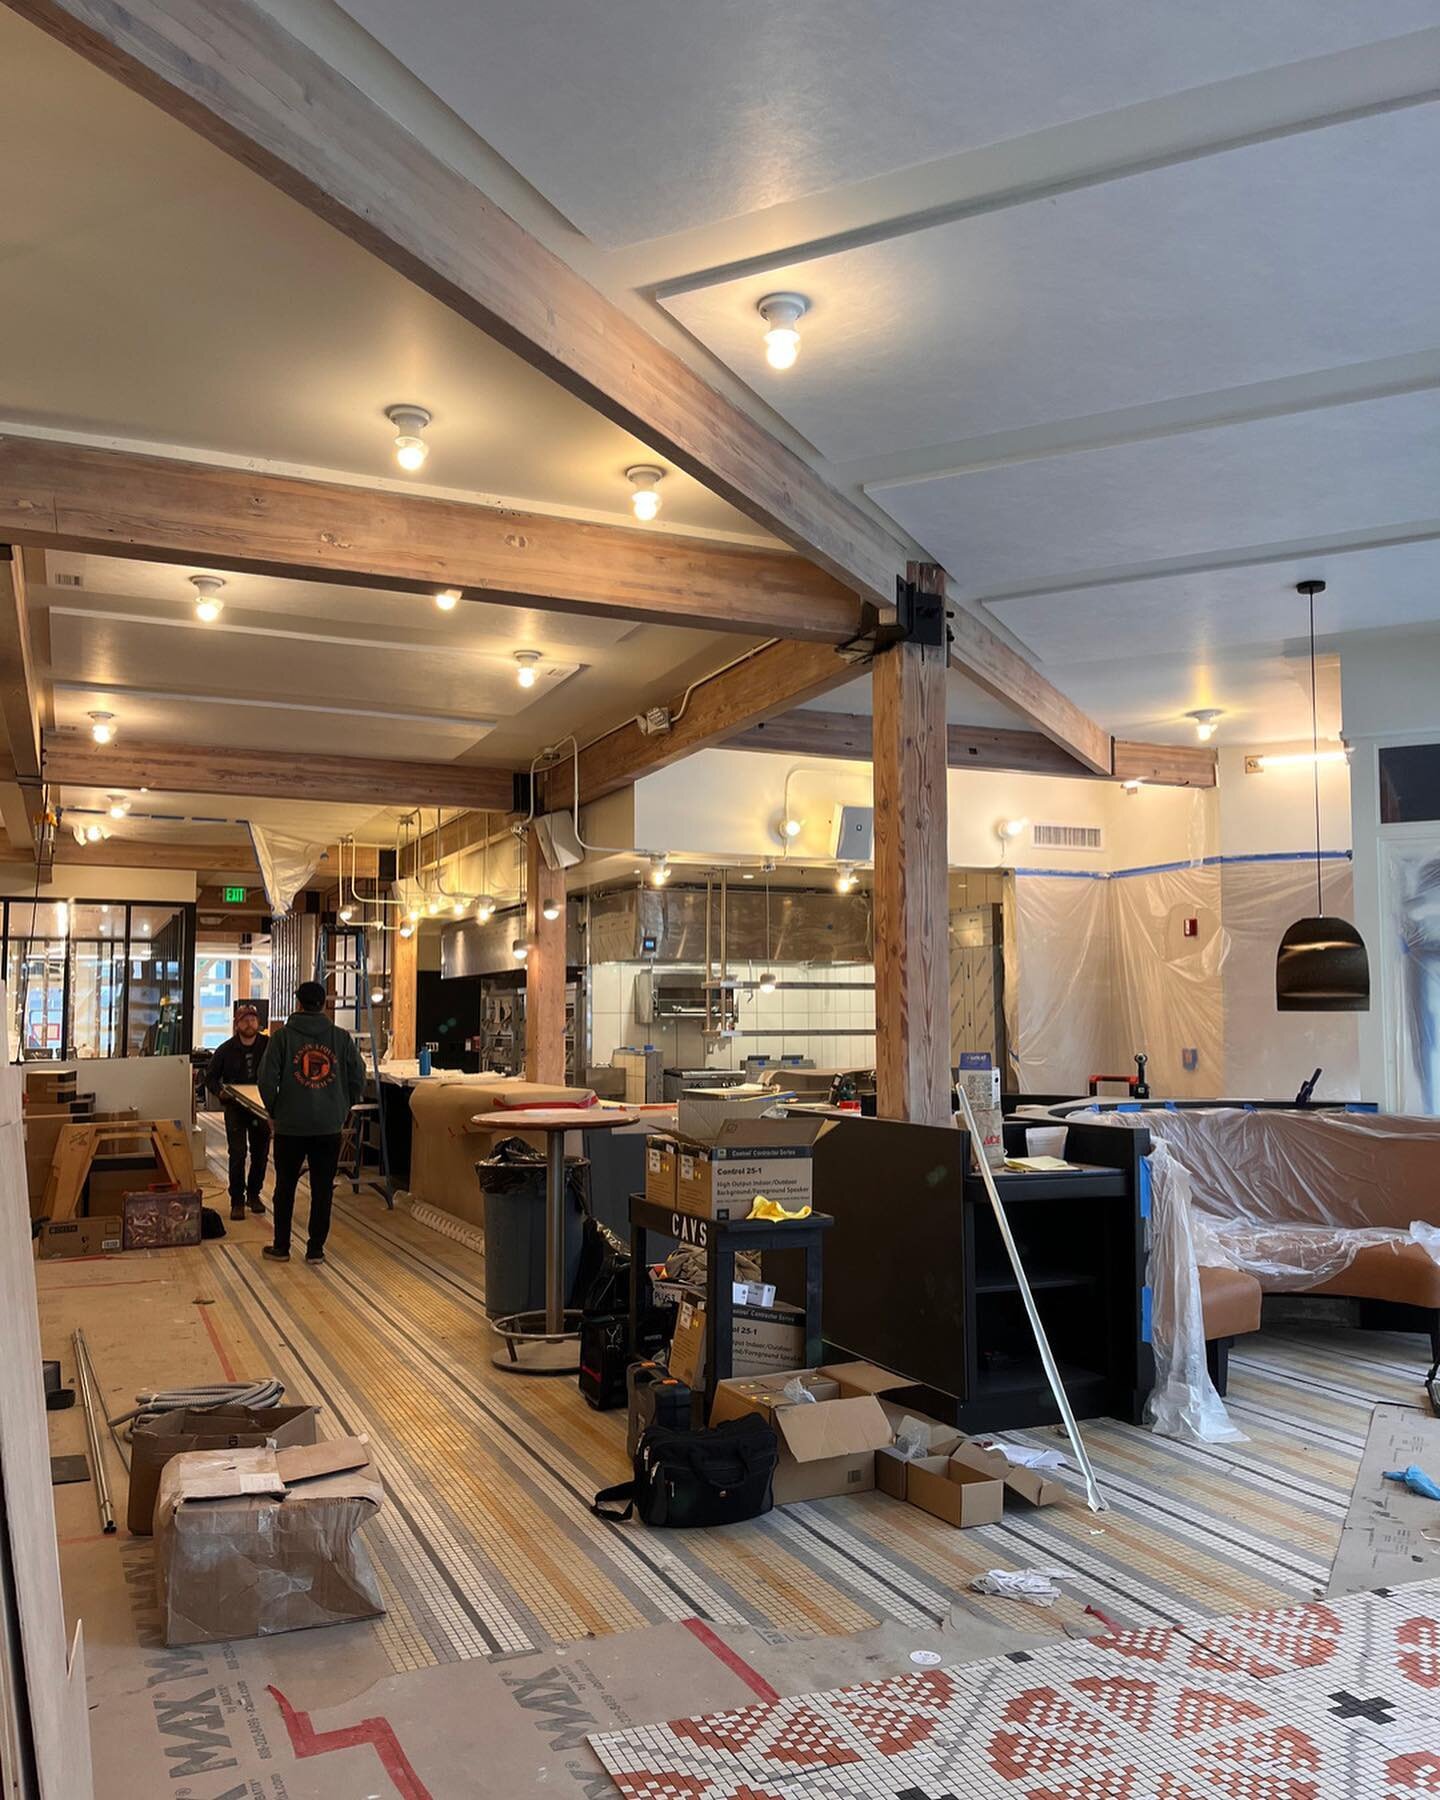 What a difference a week makes! 👀😍🙌 The finish line is in sight @flourandwaterpizzeria and the place is looking goooooood! Not too long before we can toast our hard working team on a job well done over 🍕 and 🍸!